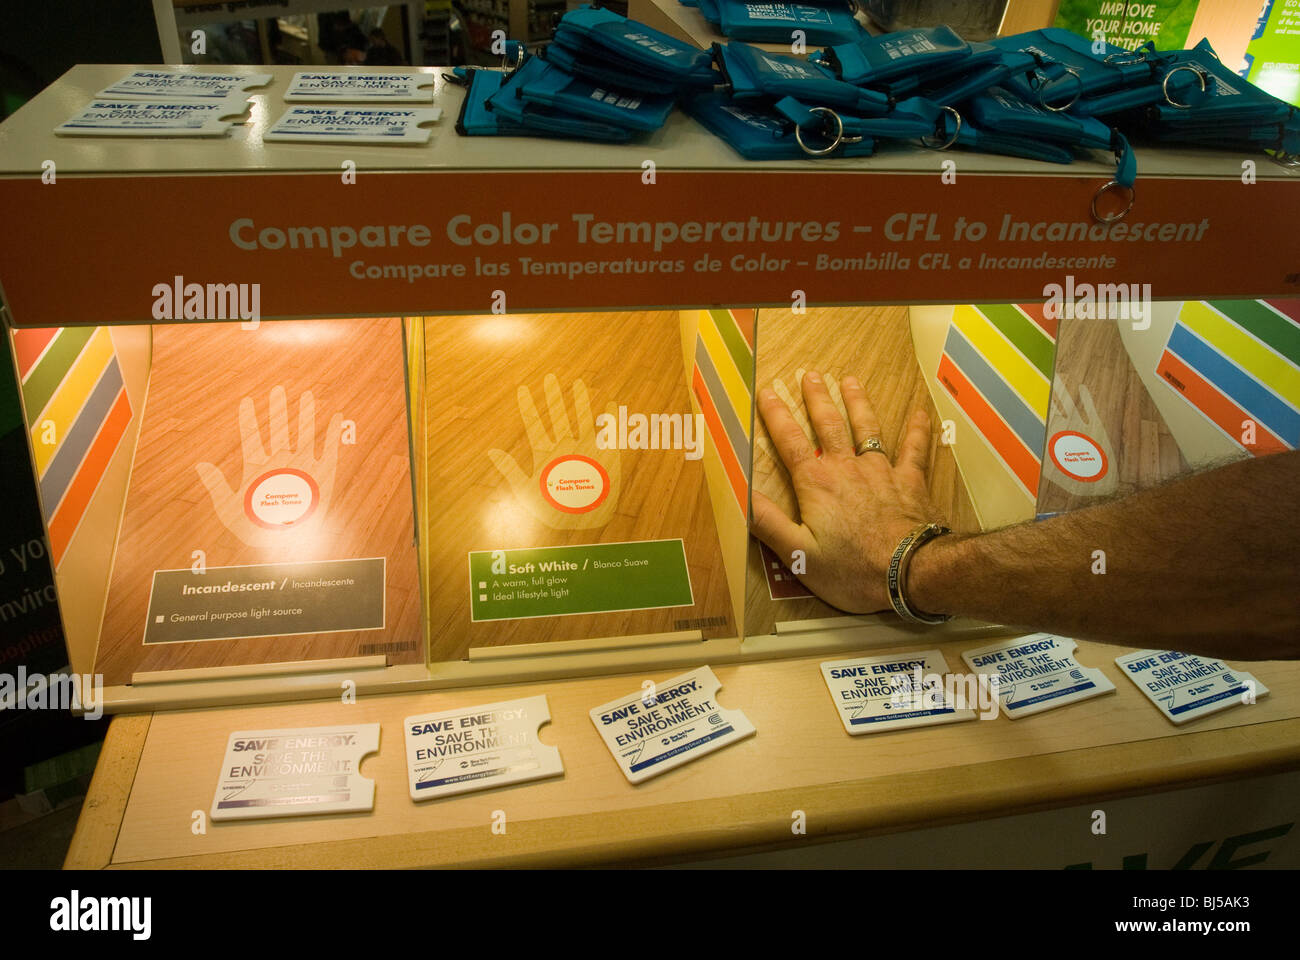 A display compares the color temperatures of compact fluorescent light bulbs and incandescent bulbs Stock Photo